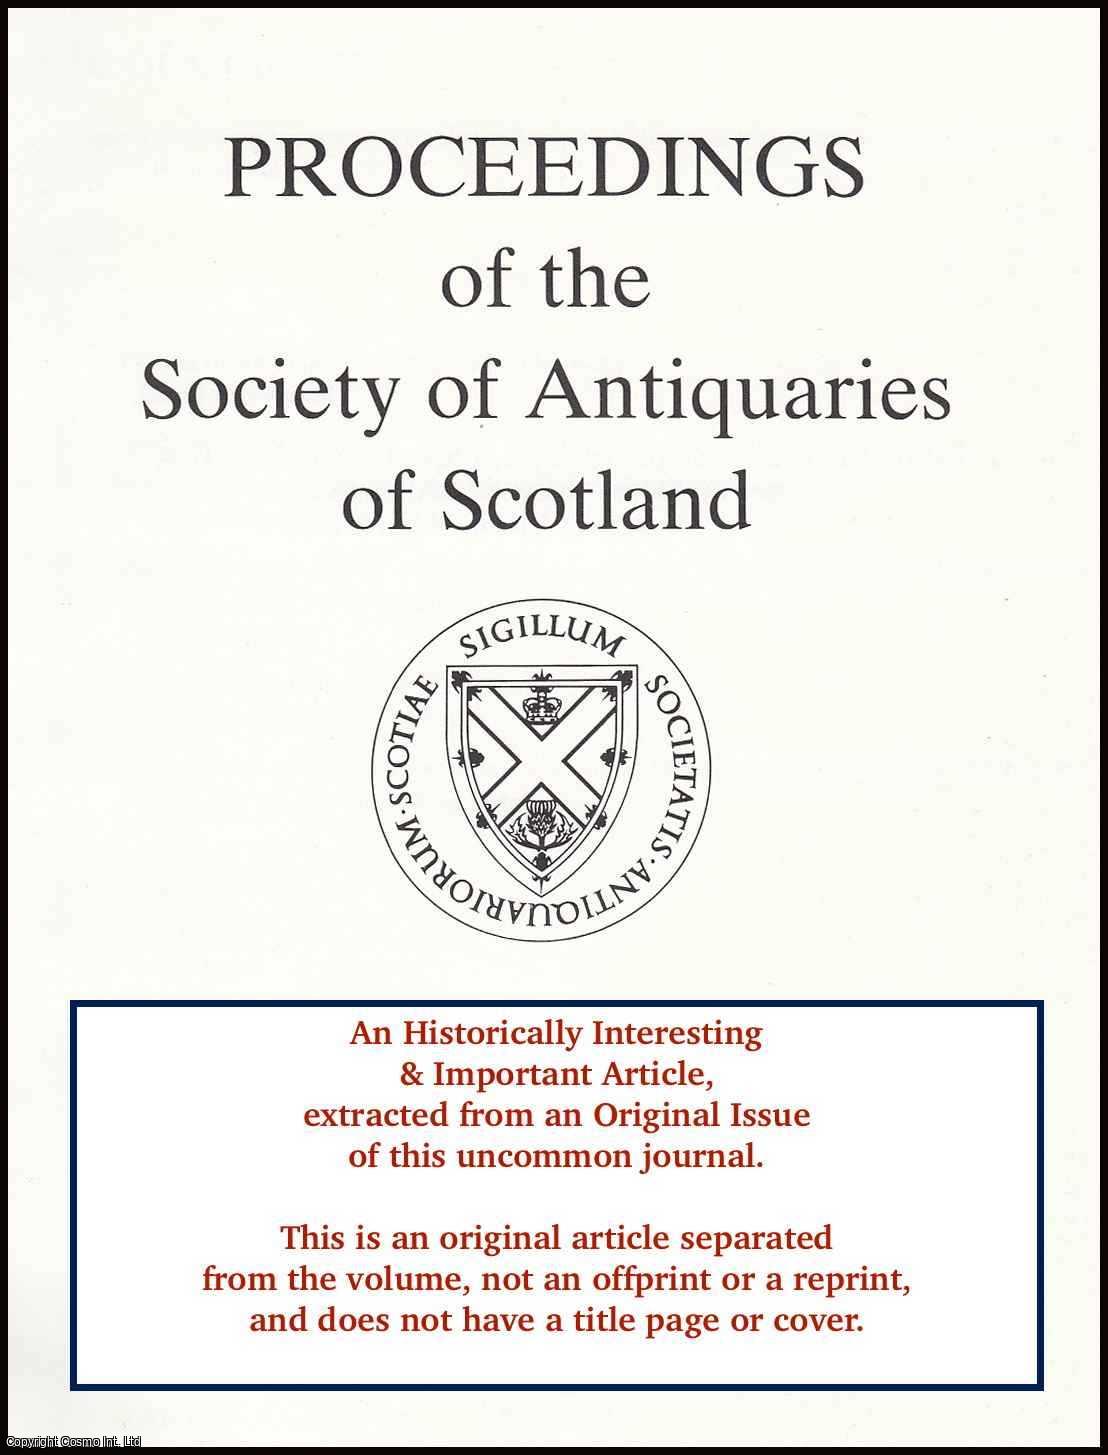 Alexander Hutcheson - The Discovery, near Broughty Ferry, of an Antique Ecclesiastical Gold Finger Ring. An original article from the Proceedings of the Society of Antiquaries of Scotland, 1884-85.